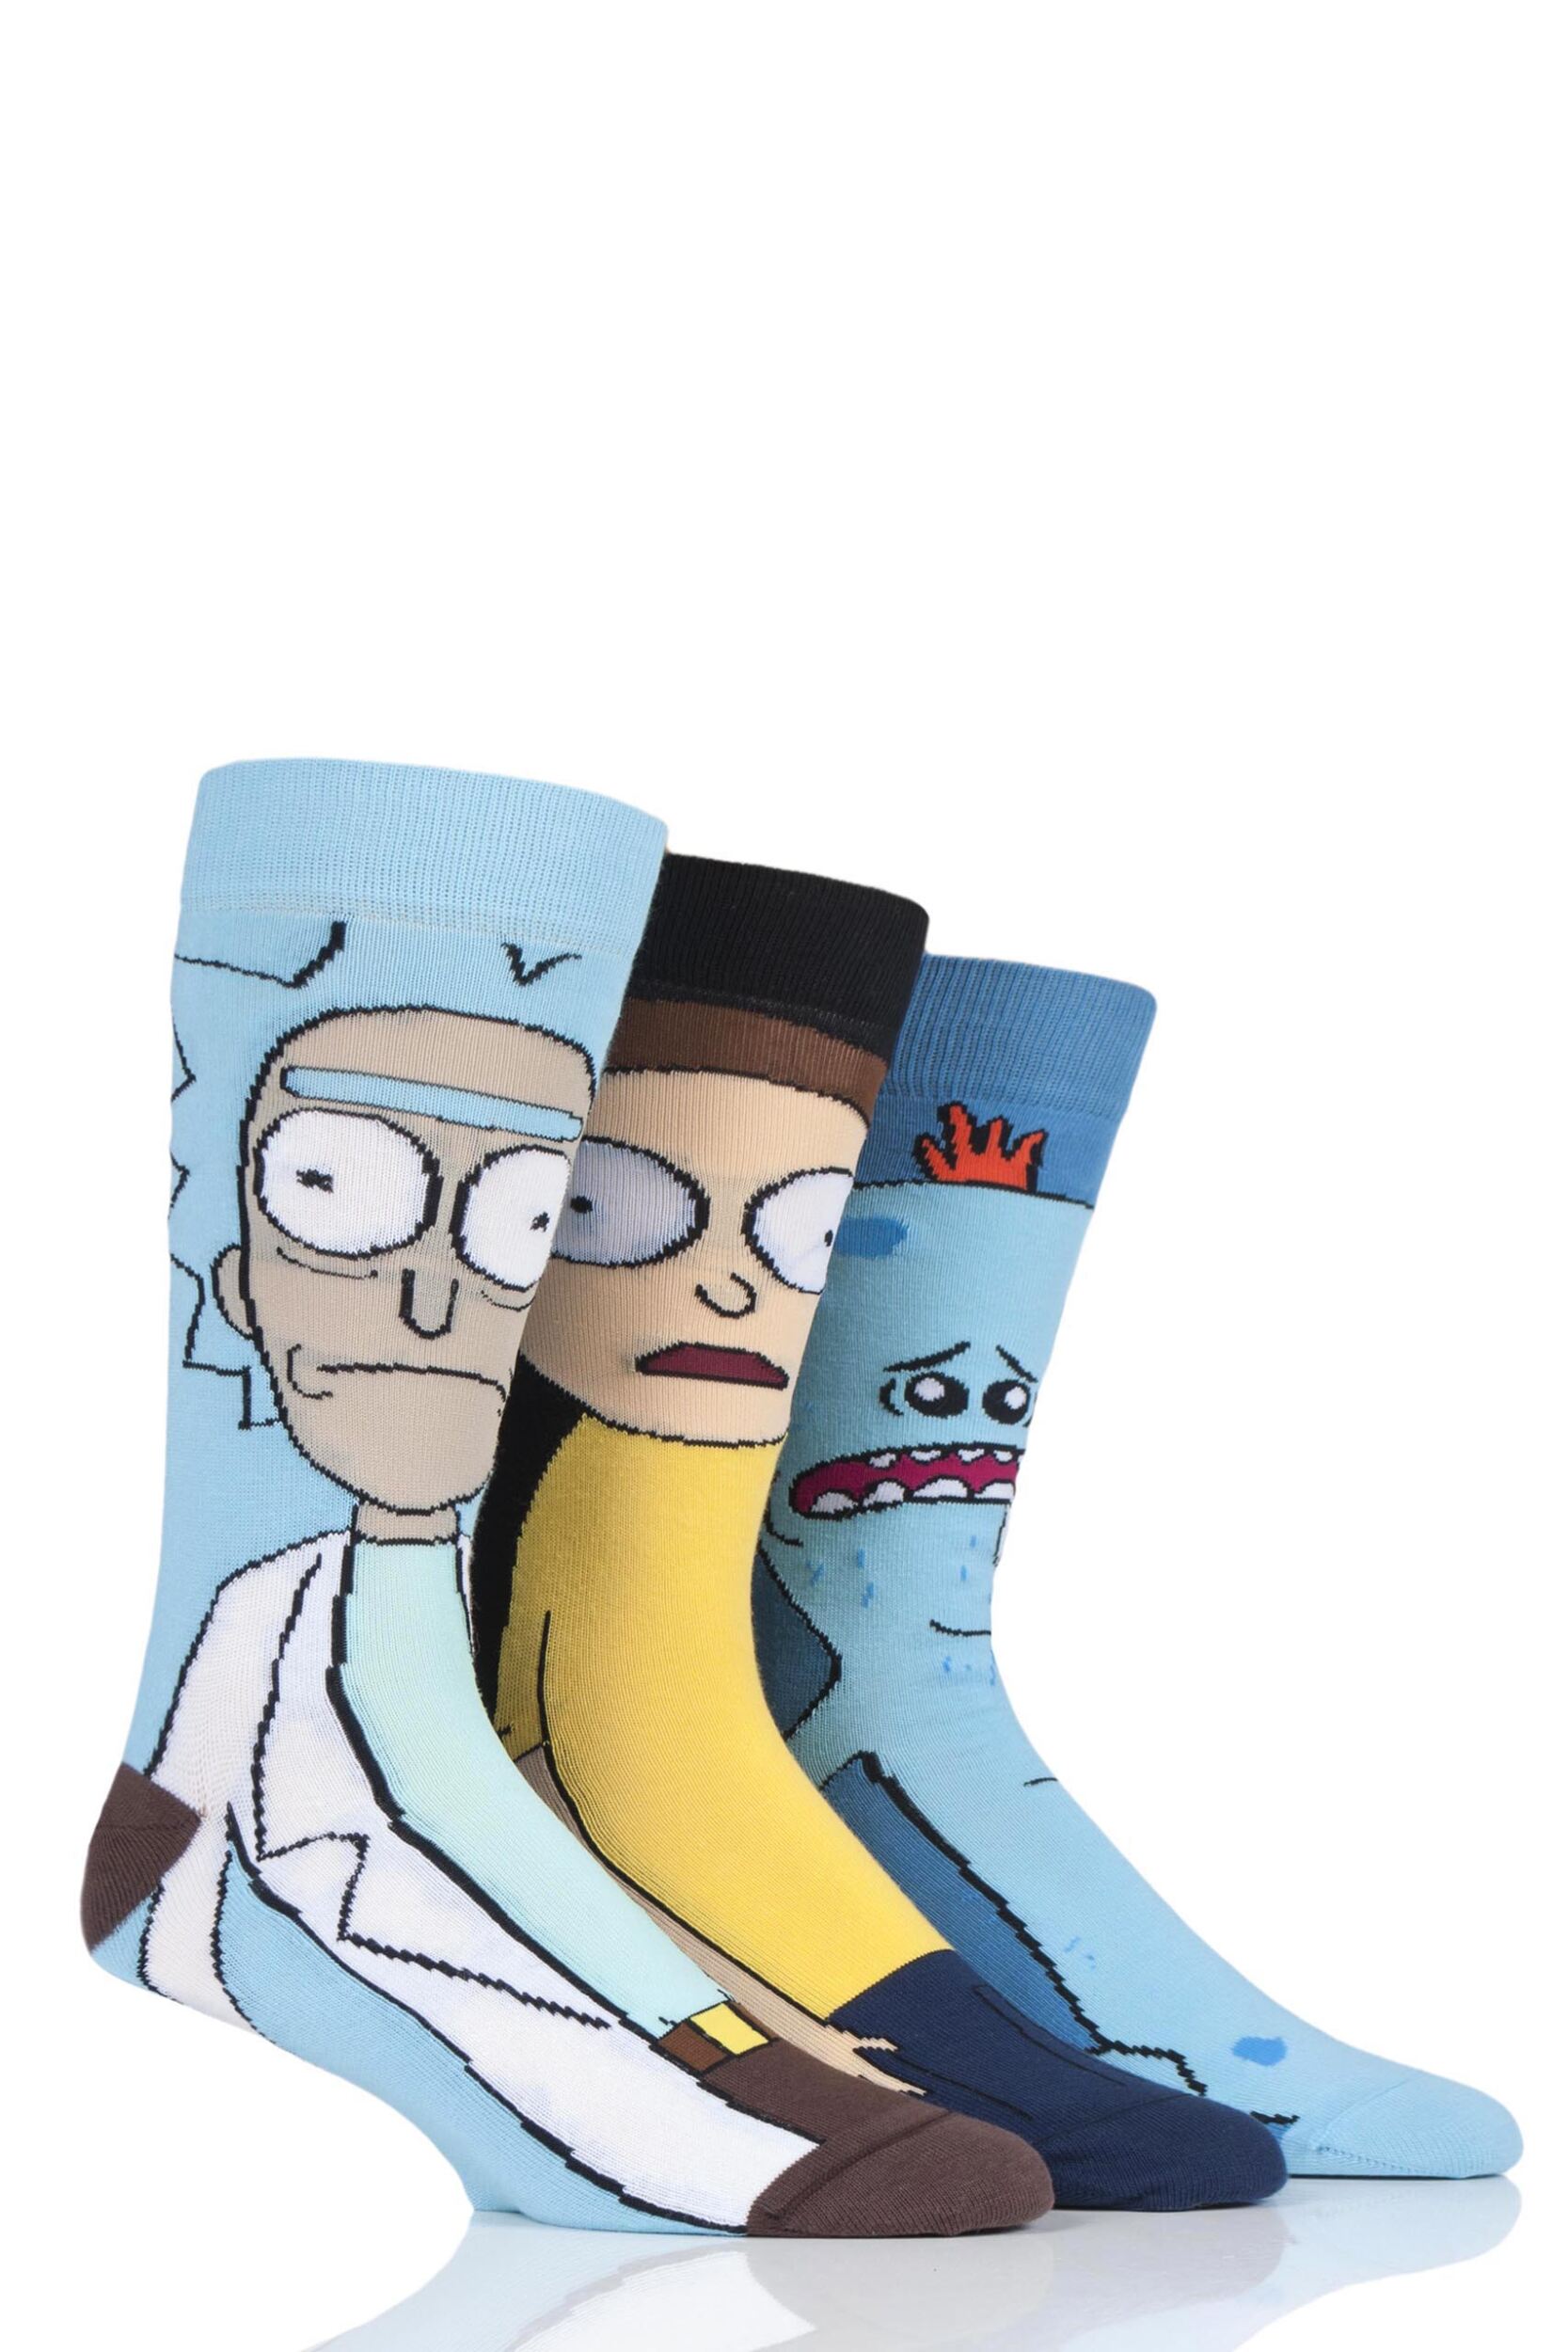 3 Pair Assorted Rick and Morty Cotton Socks Men's 6-11 Mens - Film & TV Characters